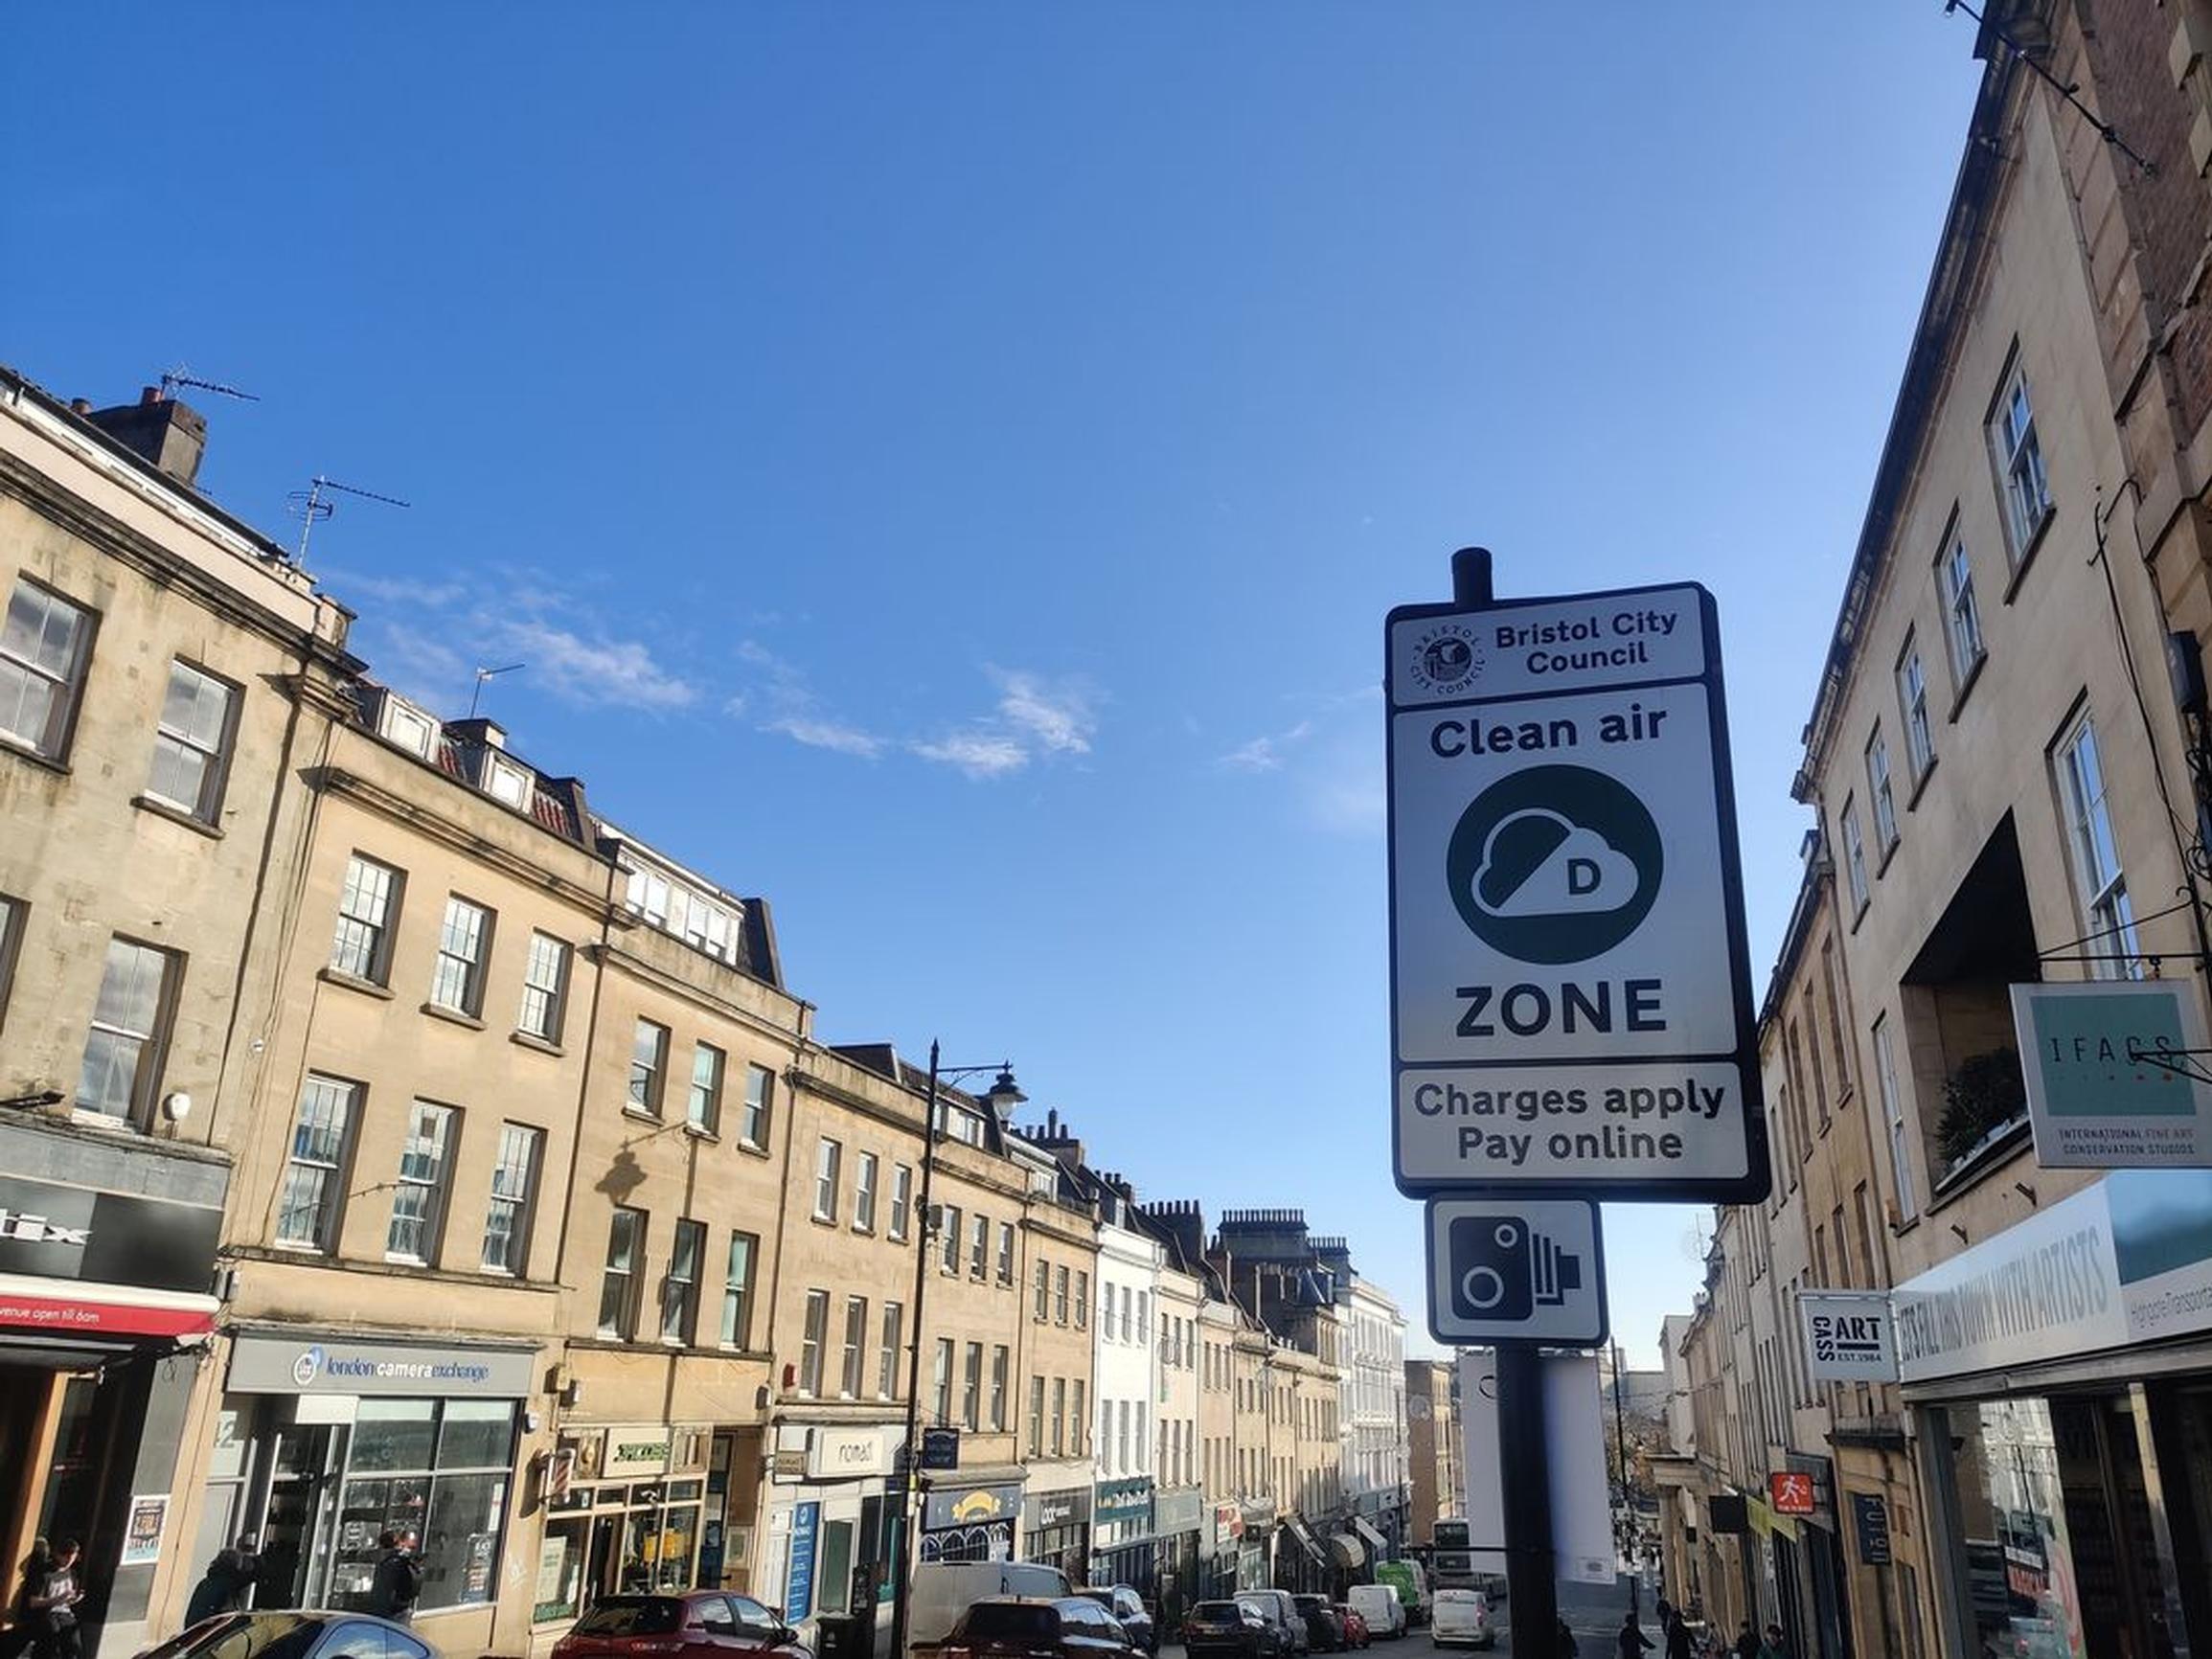 Over its first year, Bristol’s Clean Air Zone generated just under £26.4m after operating costs